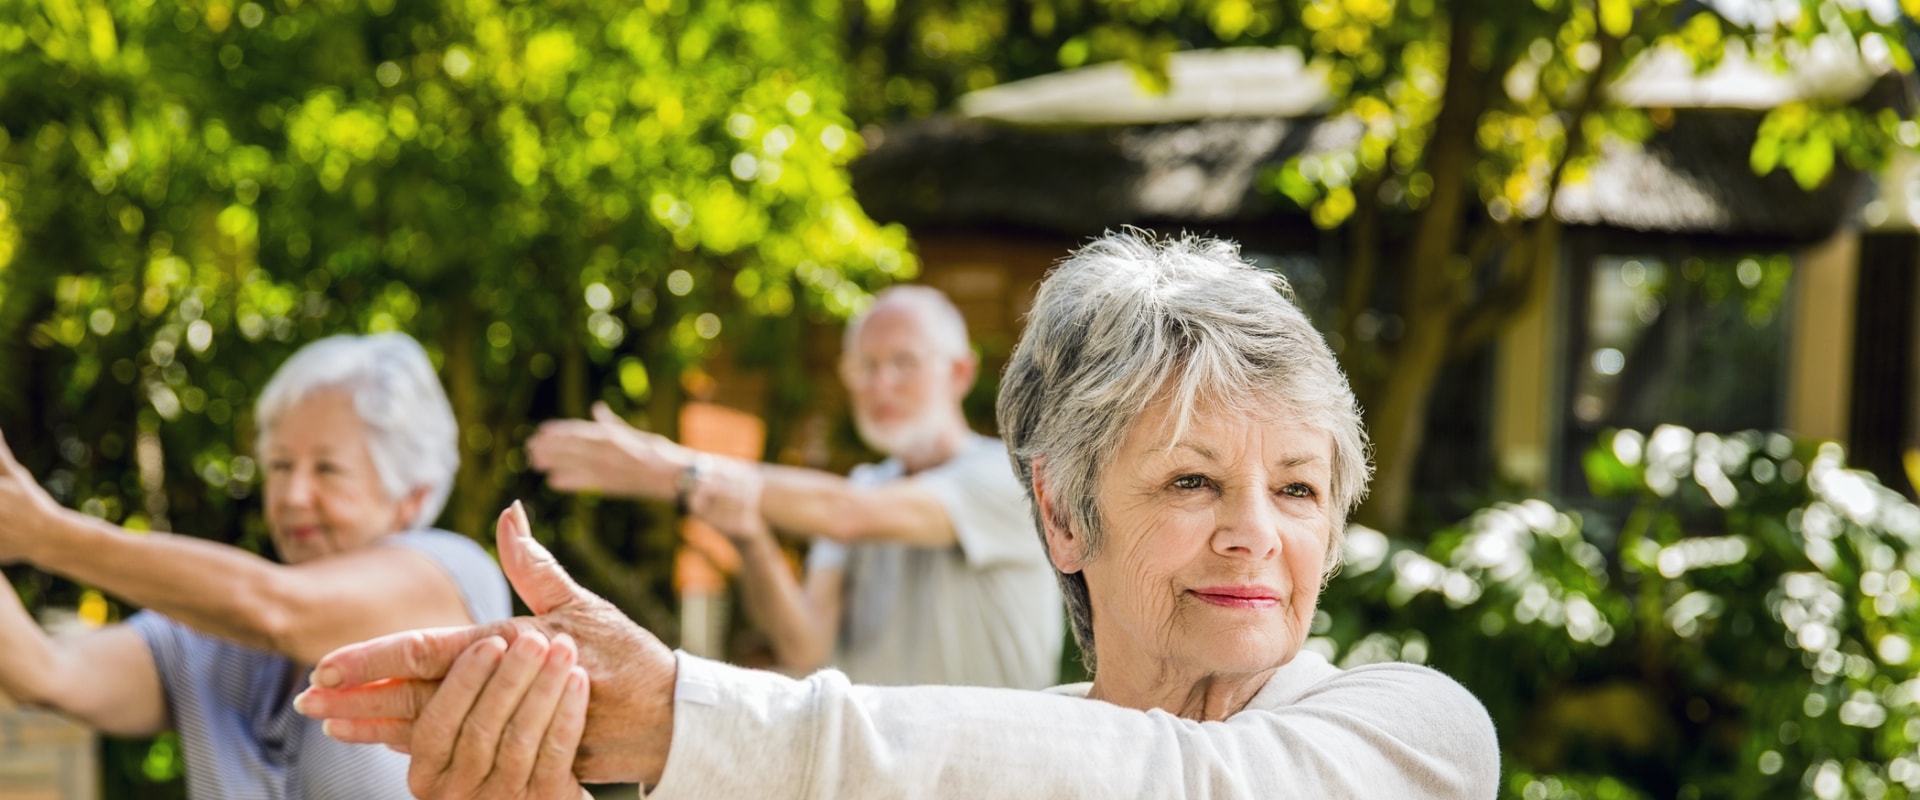 Fun Activities for Elderly: Keeping Minds and Bodies Active and Engaged